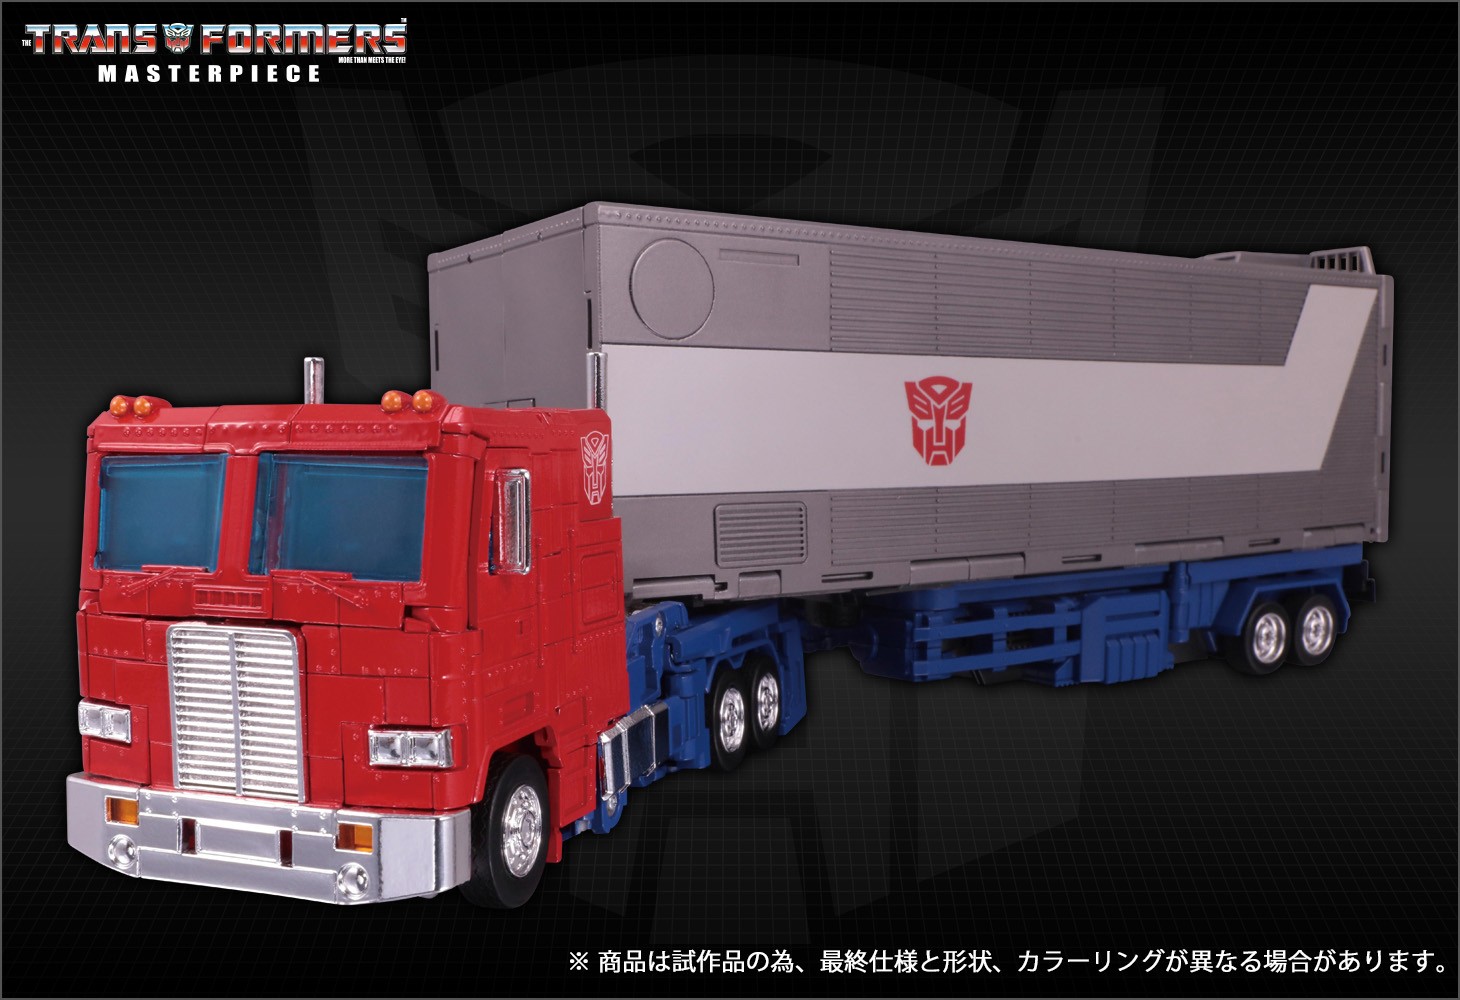 New Turn A Around Photos of Masterpiece MP-44 3.0 and More Pre-Orders ...